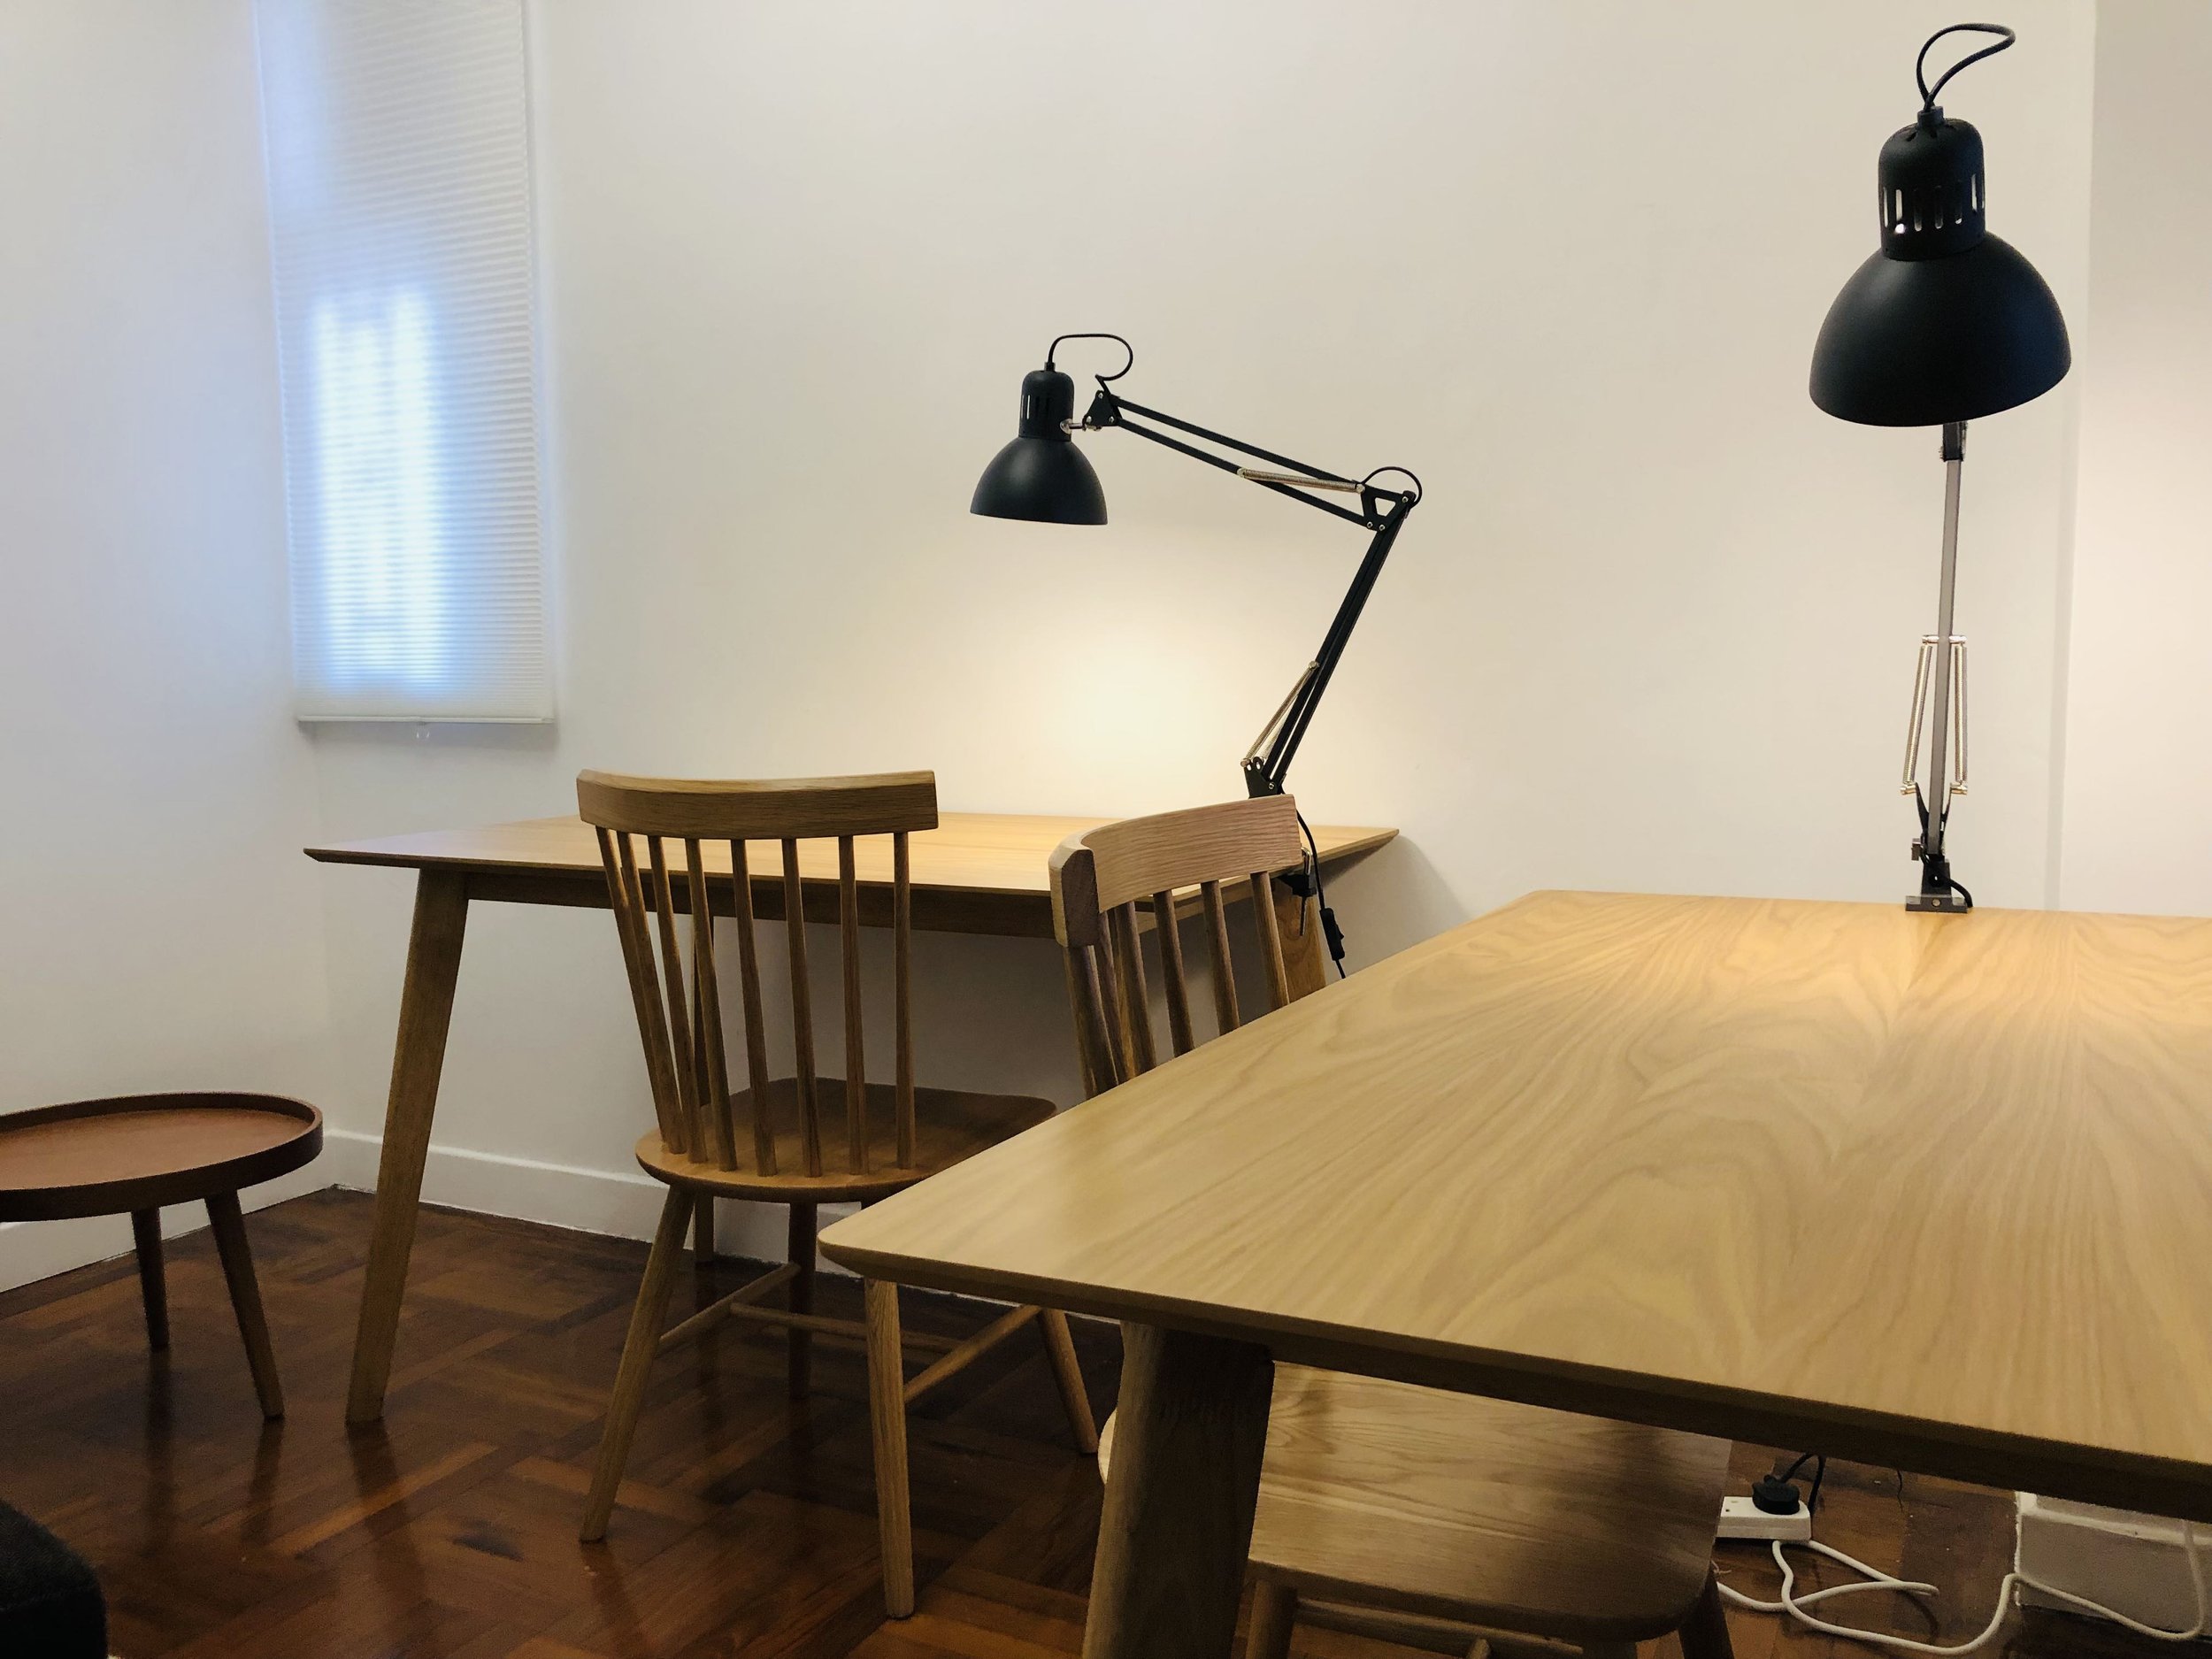 co working space-wanchai commune share living - coliving hong kong .jpg